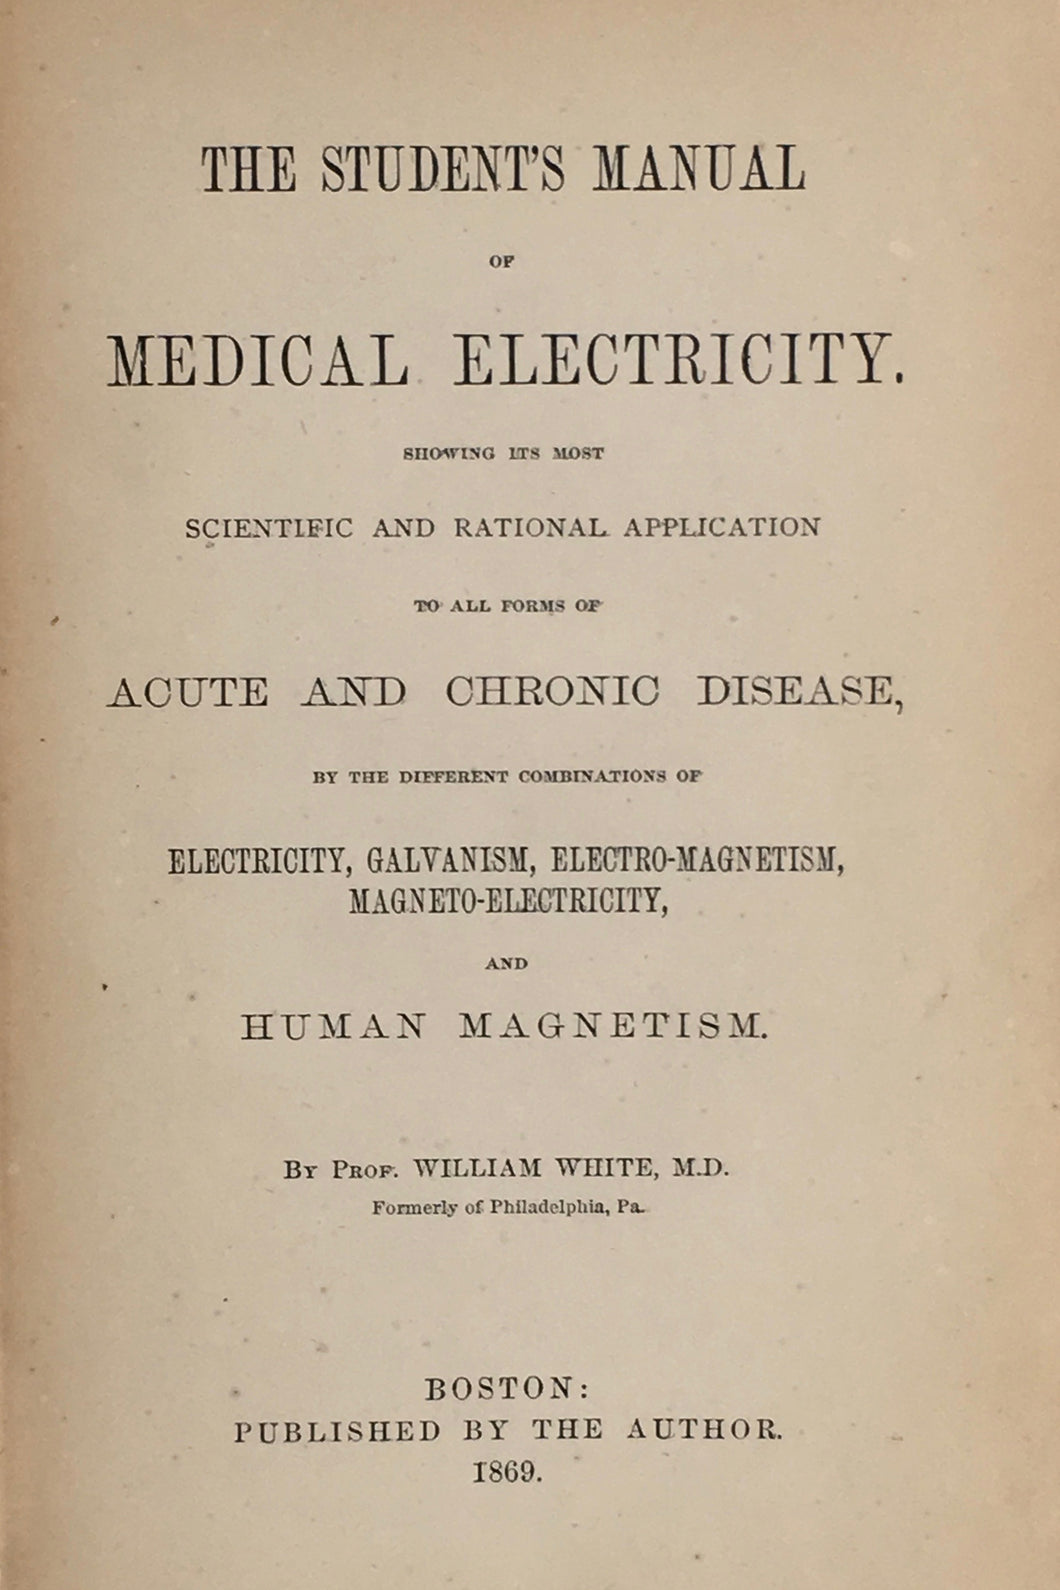 The Student's manual of medical electricity